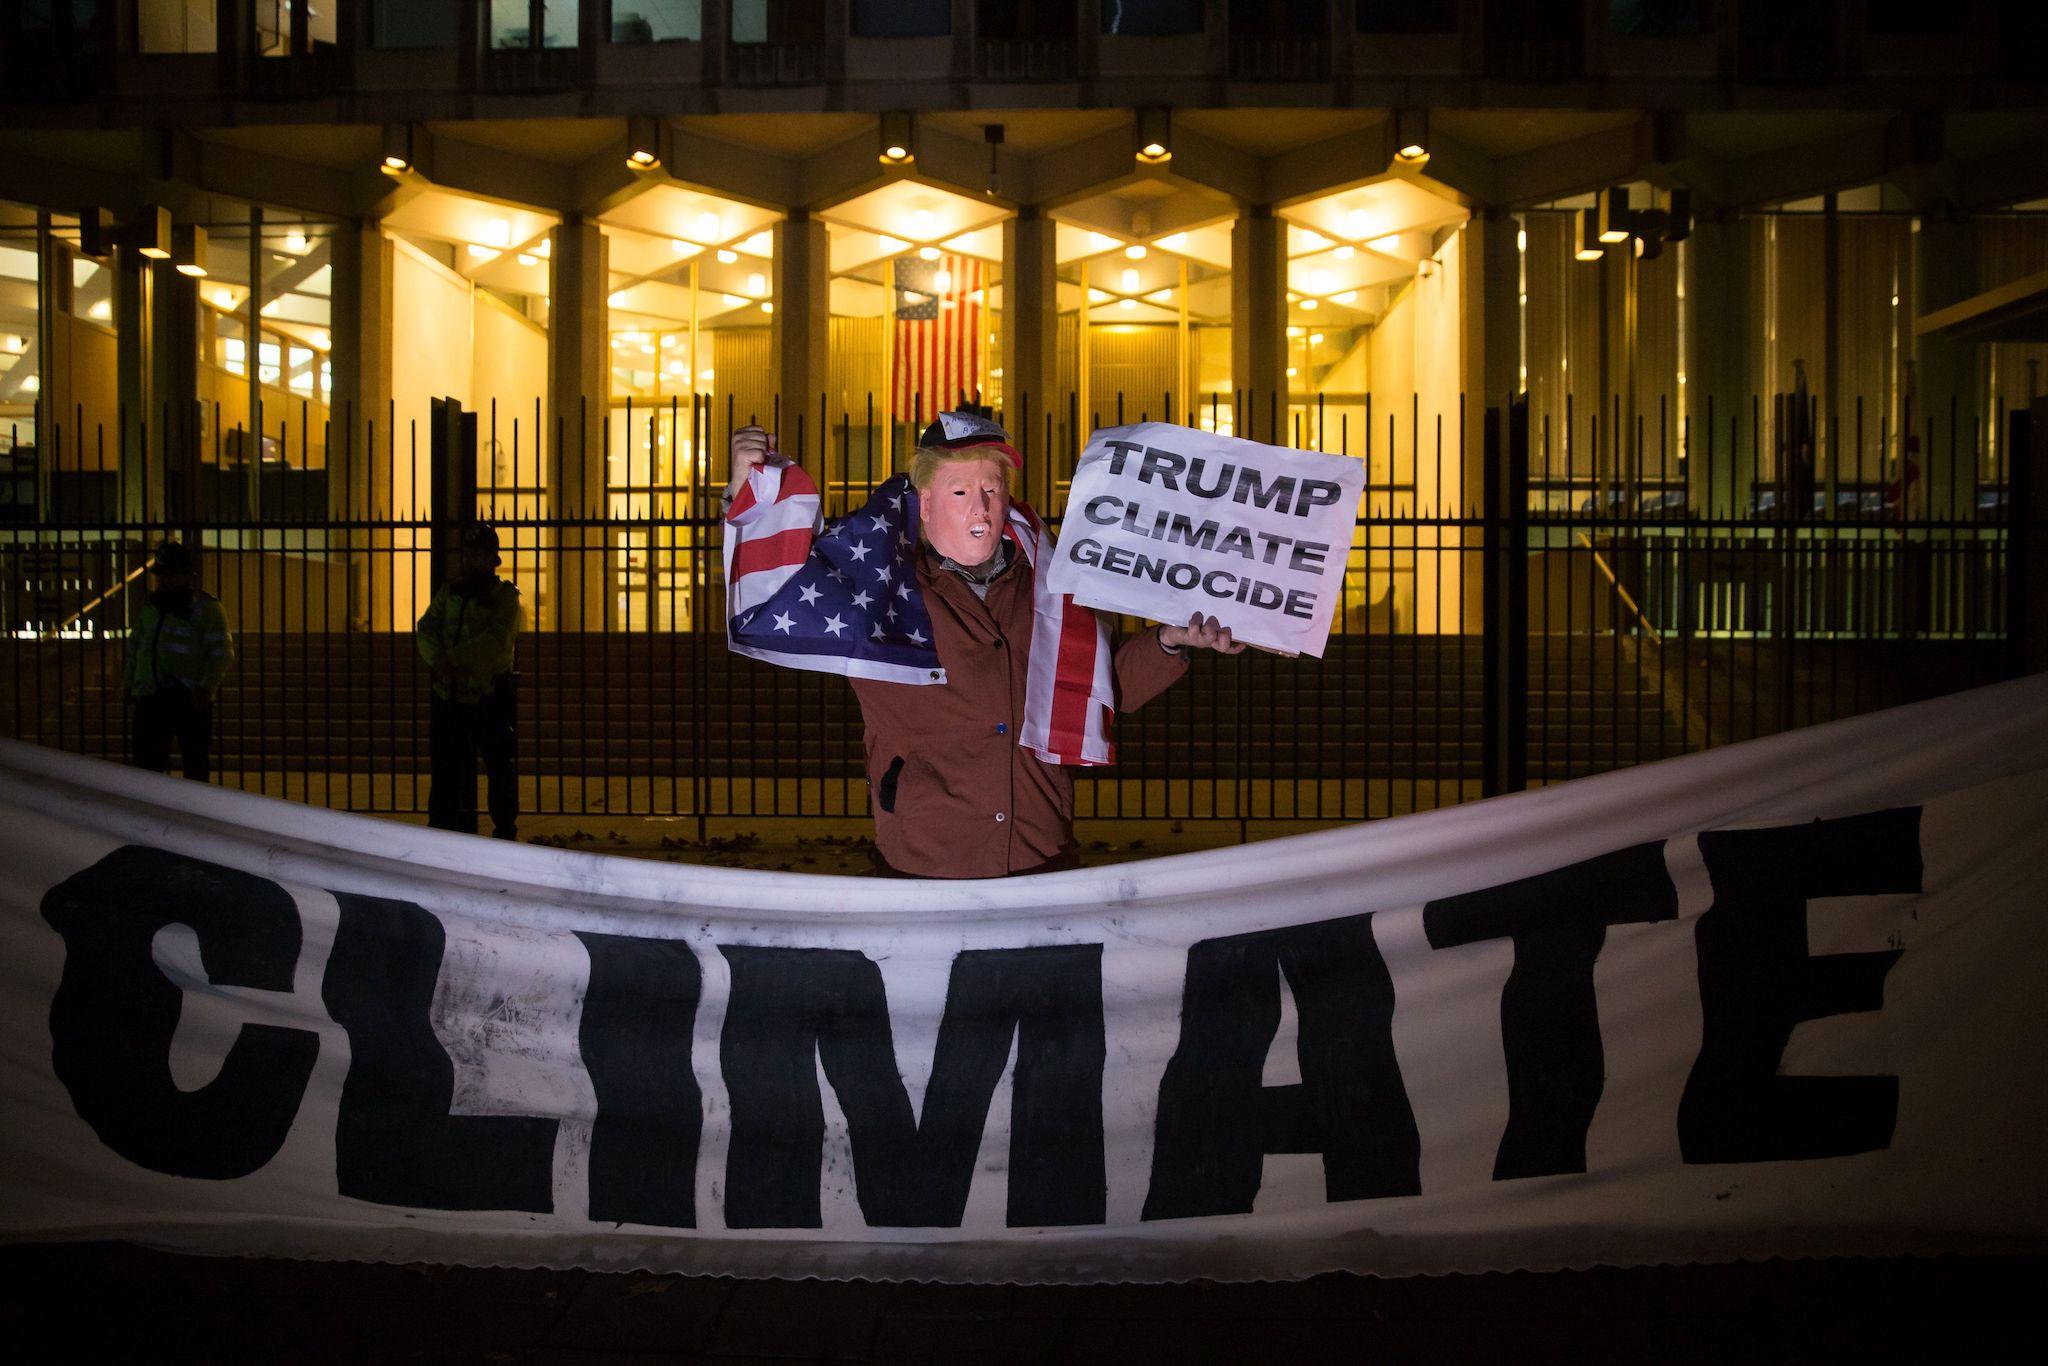 A man wearing a mask portraying newly elected US president-elect Donald Trump poses with a sign during a demonstration against Trump's vow to withdraw the US from the Paris Climate Accord outside the US Embassy in central London in November 18, 2016